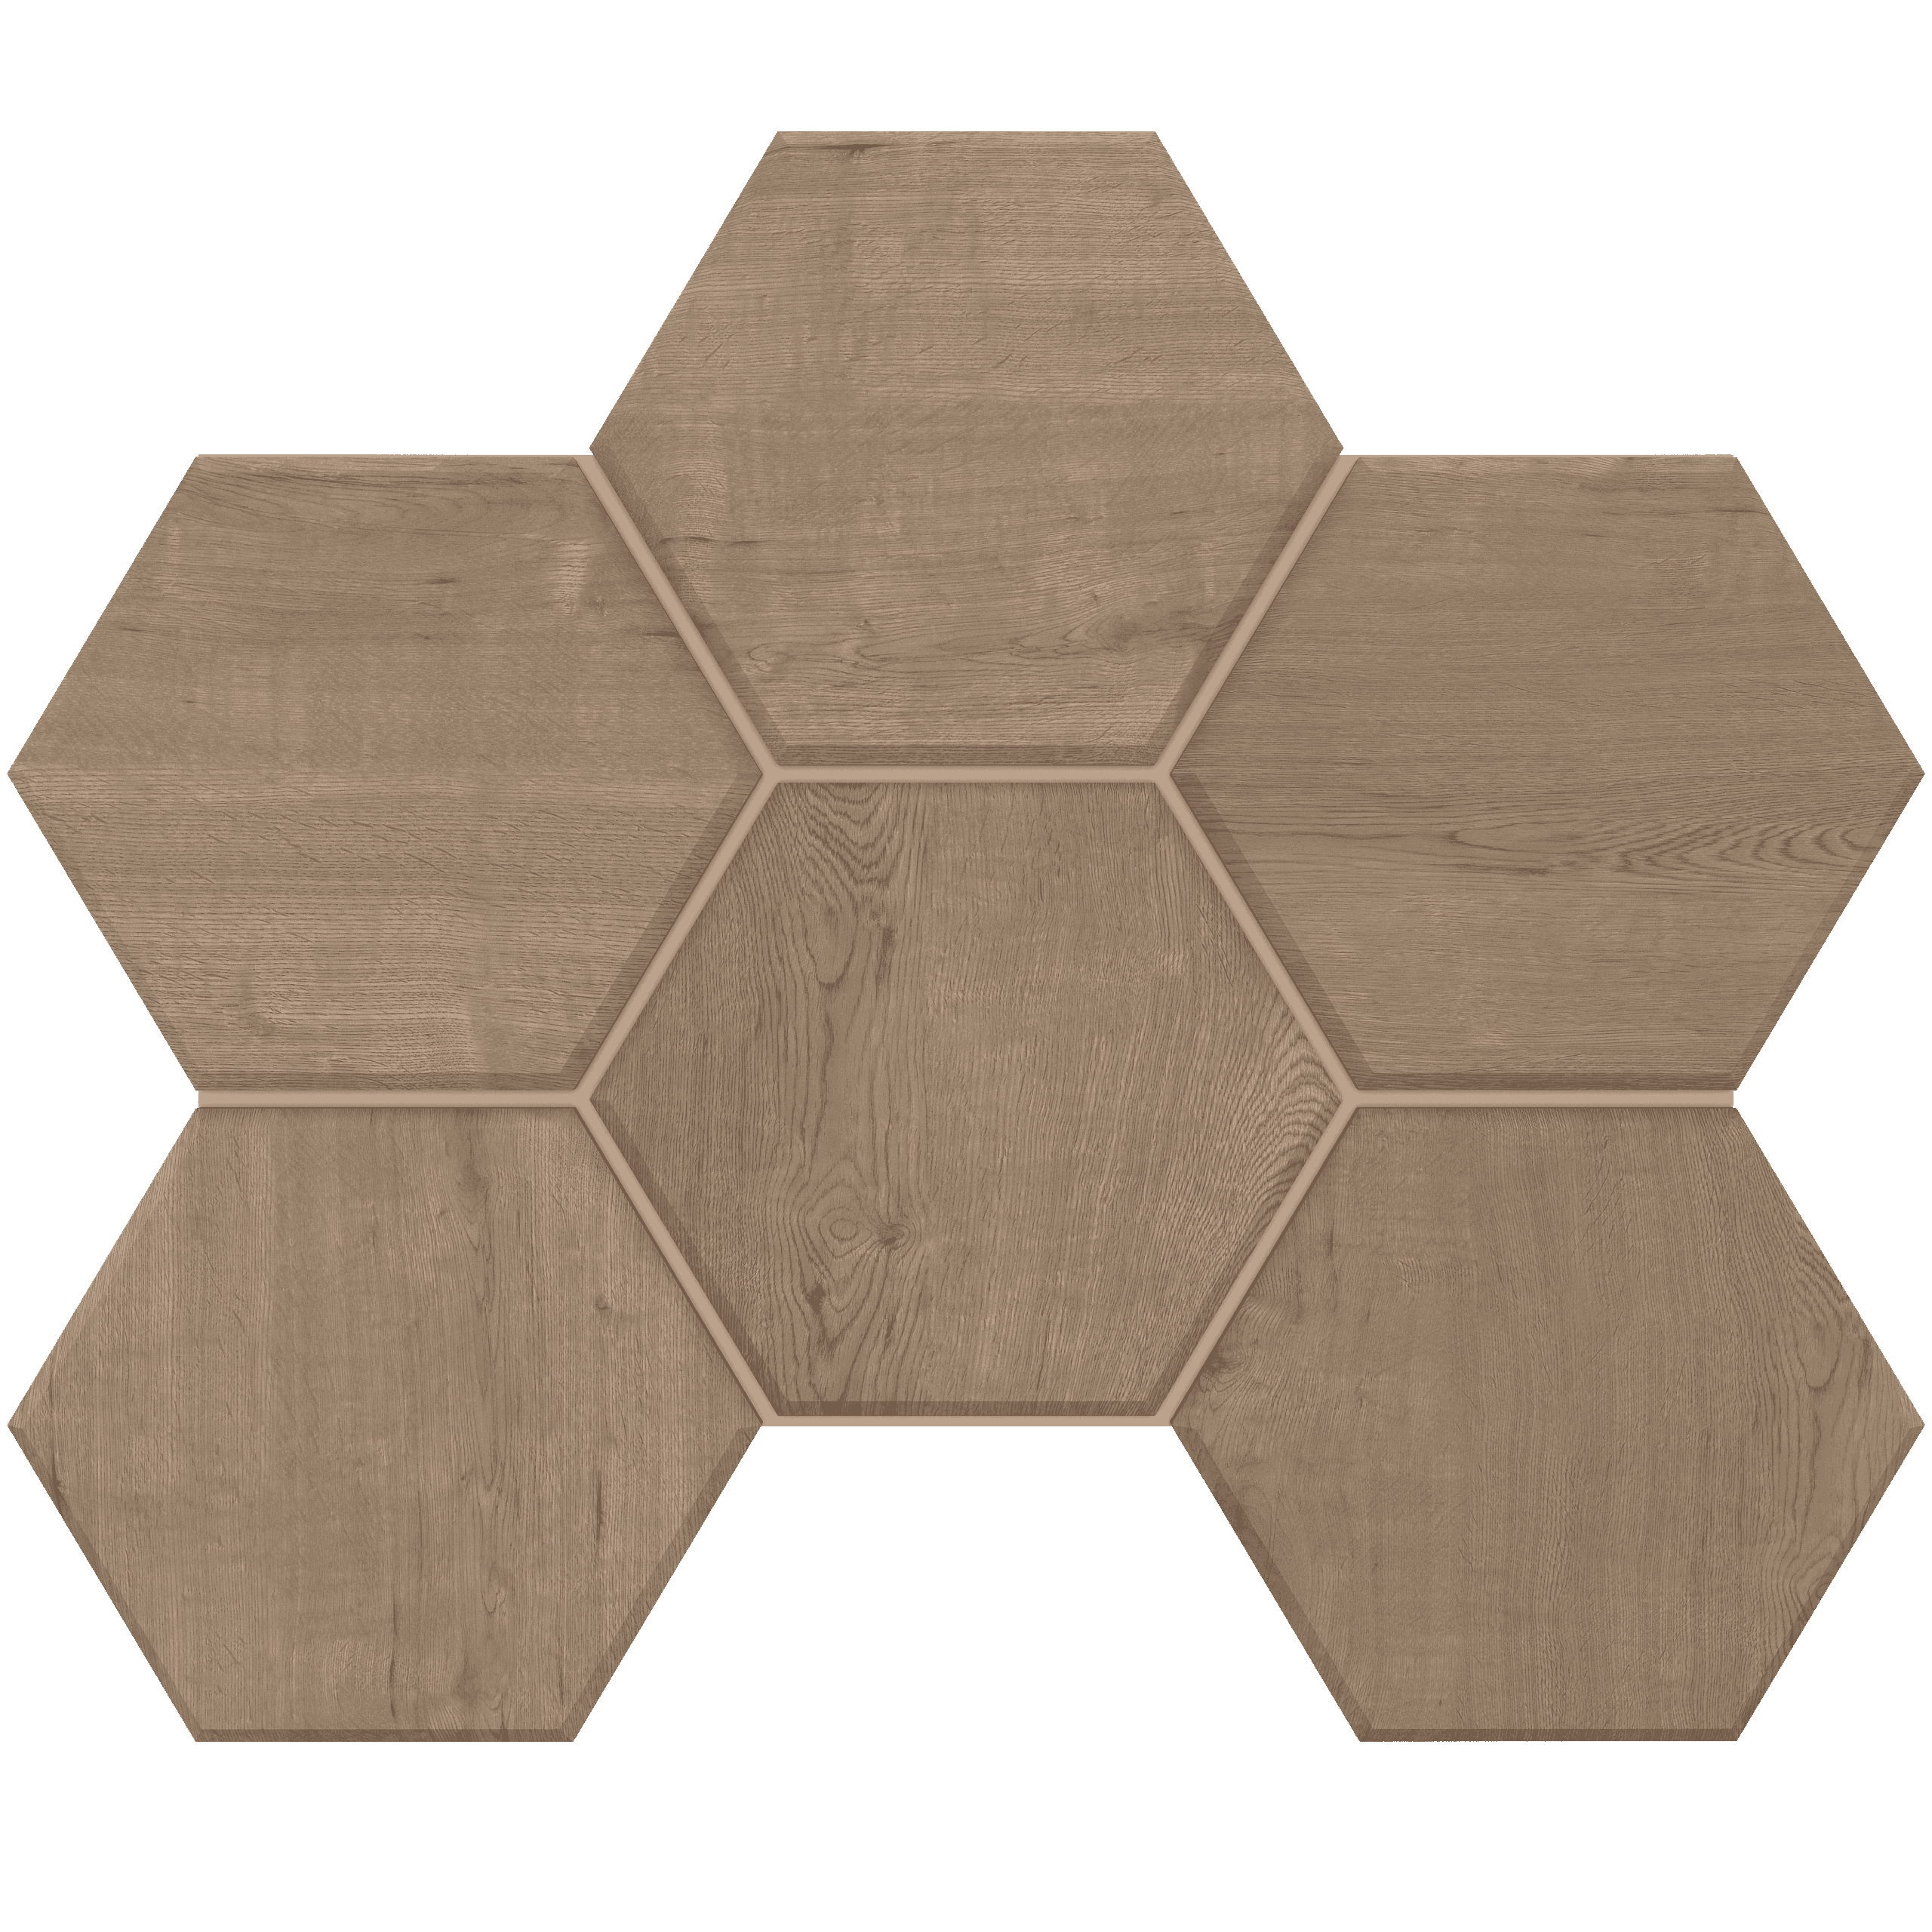 Мозаика Estima Classic Wood Rusty Beige CW03 Hexagon Непол. 25x28,5 natural creative wood bookend holder reusable resistance to fall book holder for school office desktop student book stand